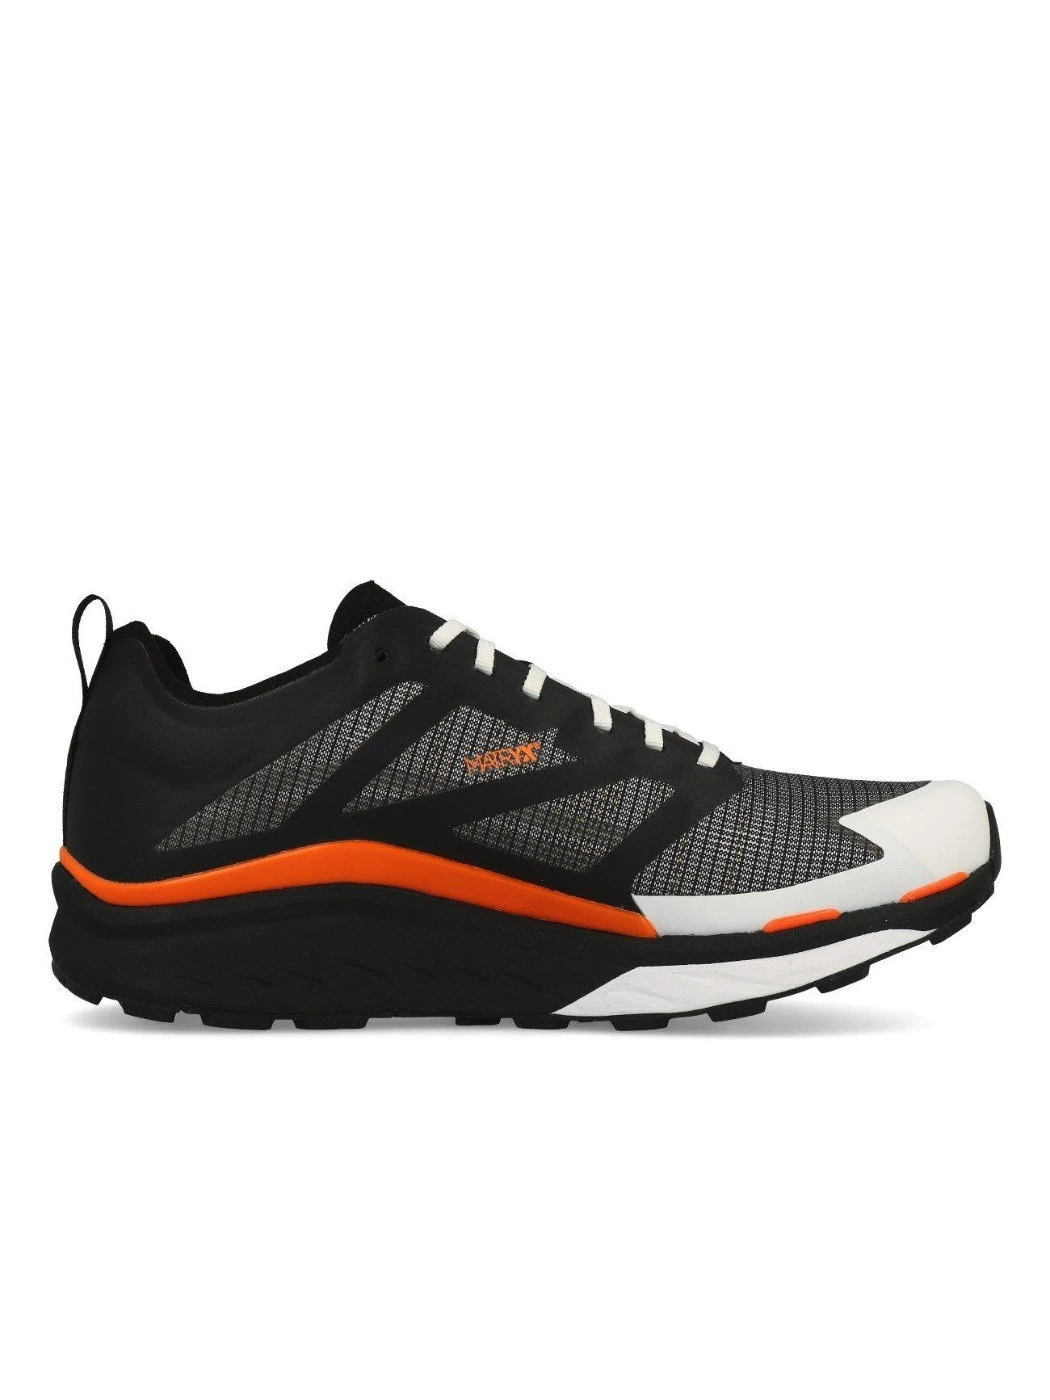 SCARPA TRAIL RUNNING THE NORTH FACE M VECTIV INFINITE